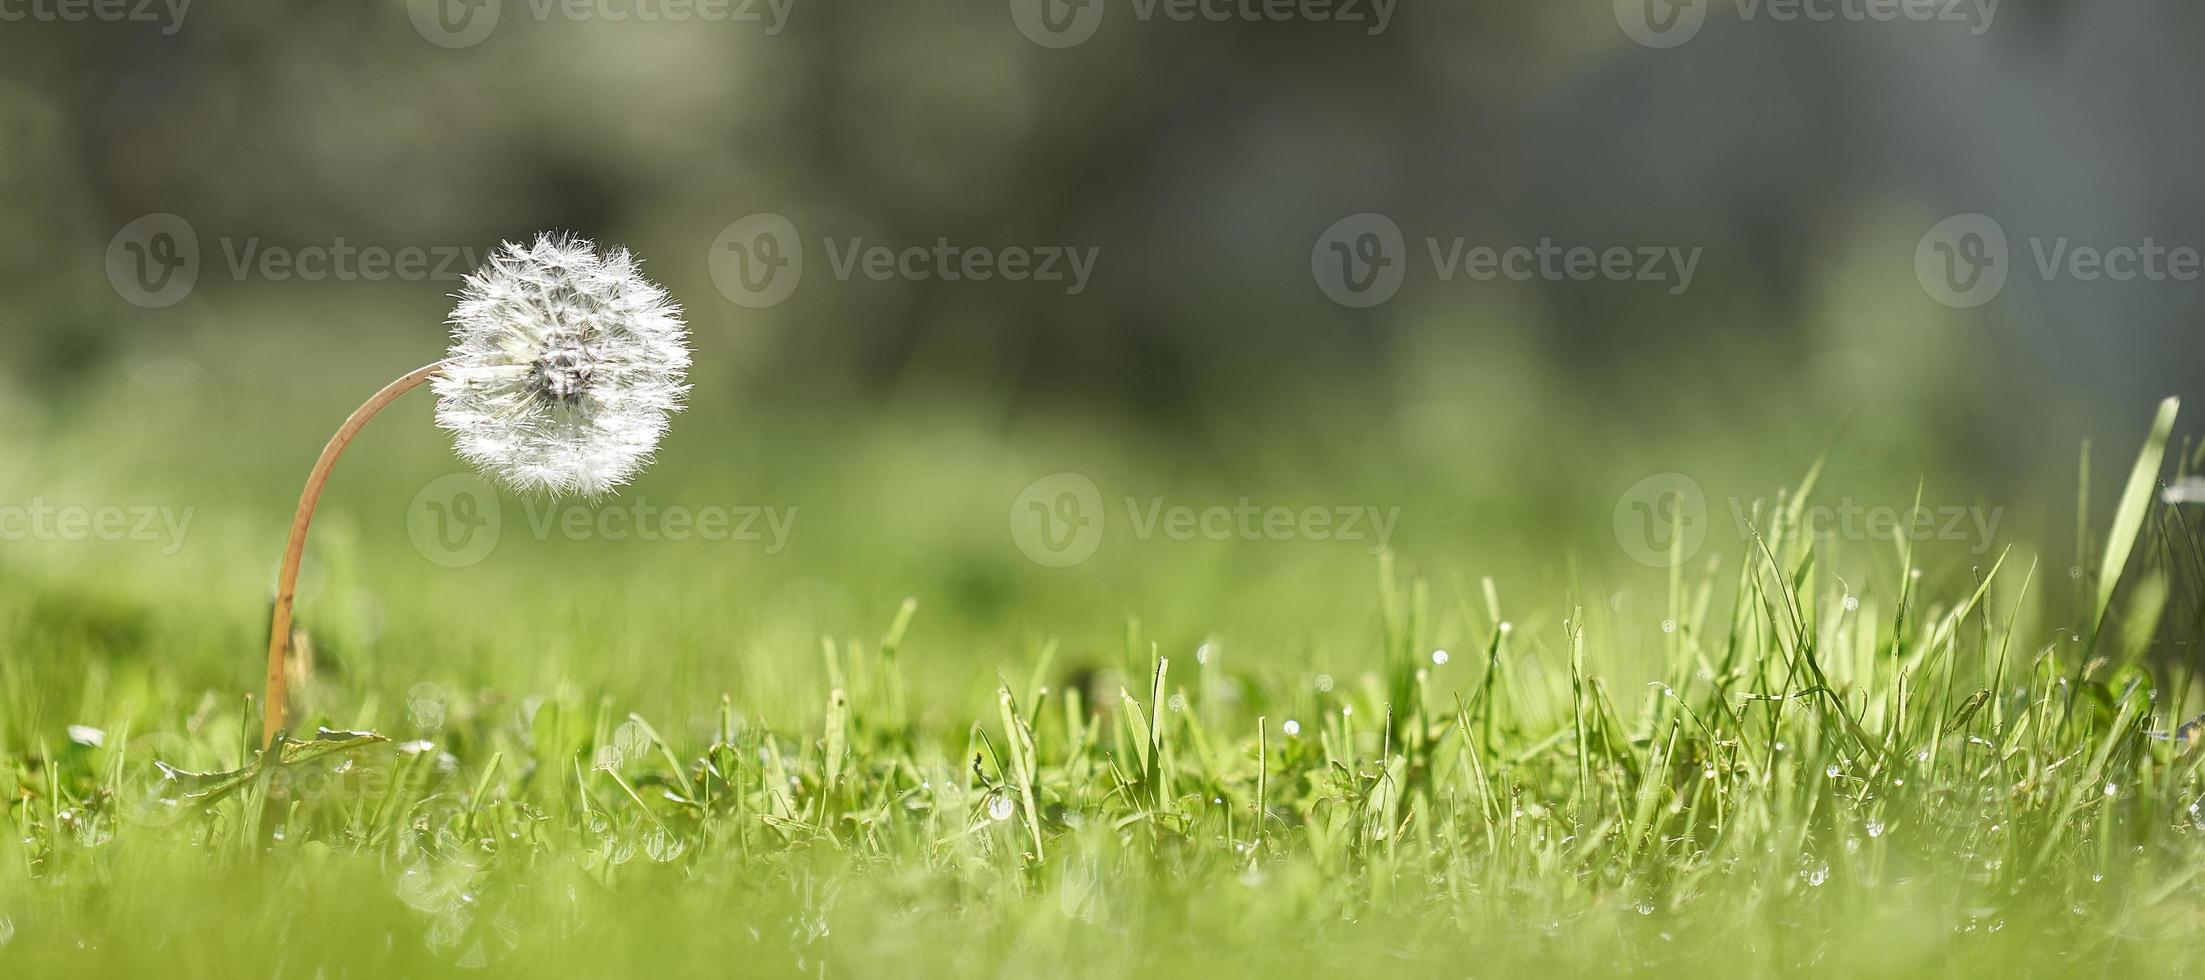 Dandelion on the background of green grass with dew drops. Foreground and background in blur. Photo with copy space.